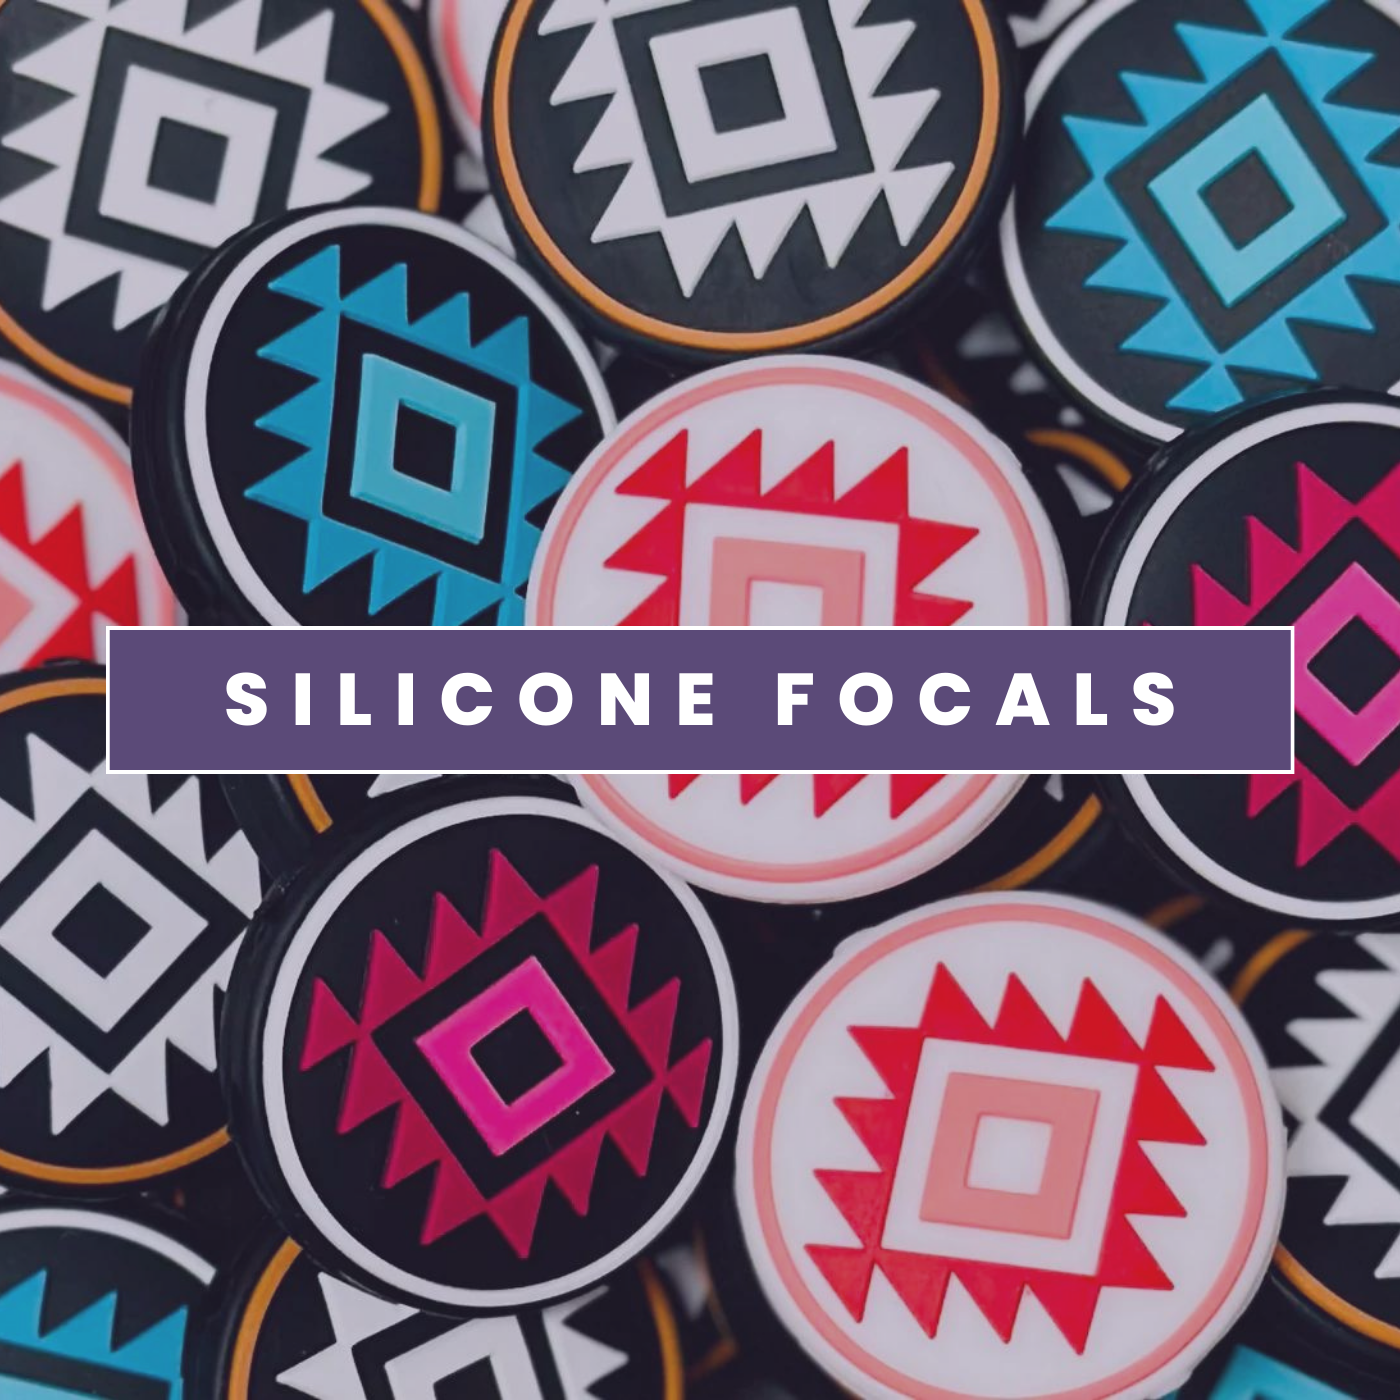 Who wants silicone focal beads at these prices?#siliconefocals